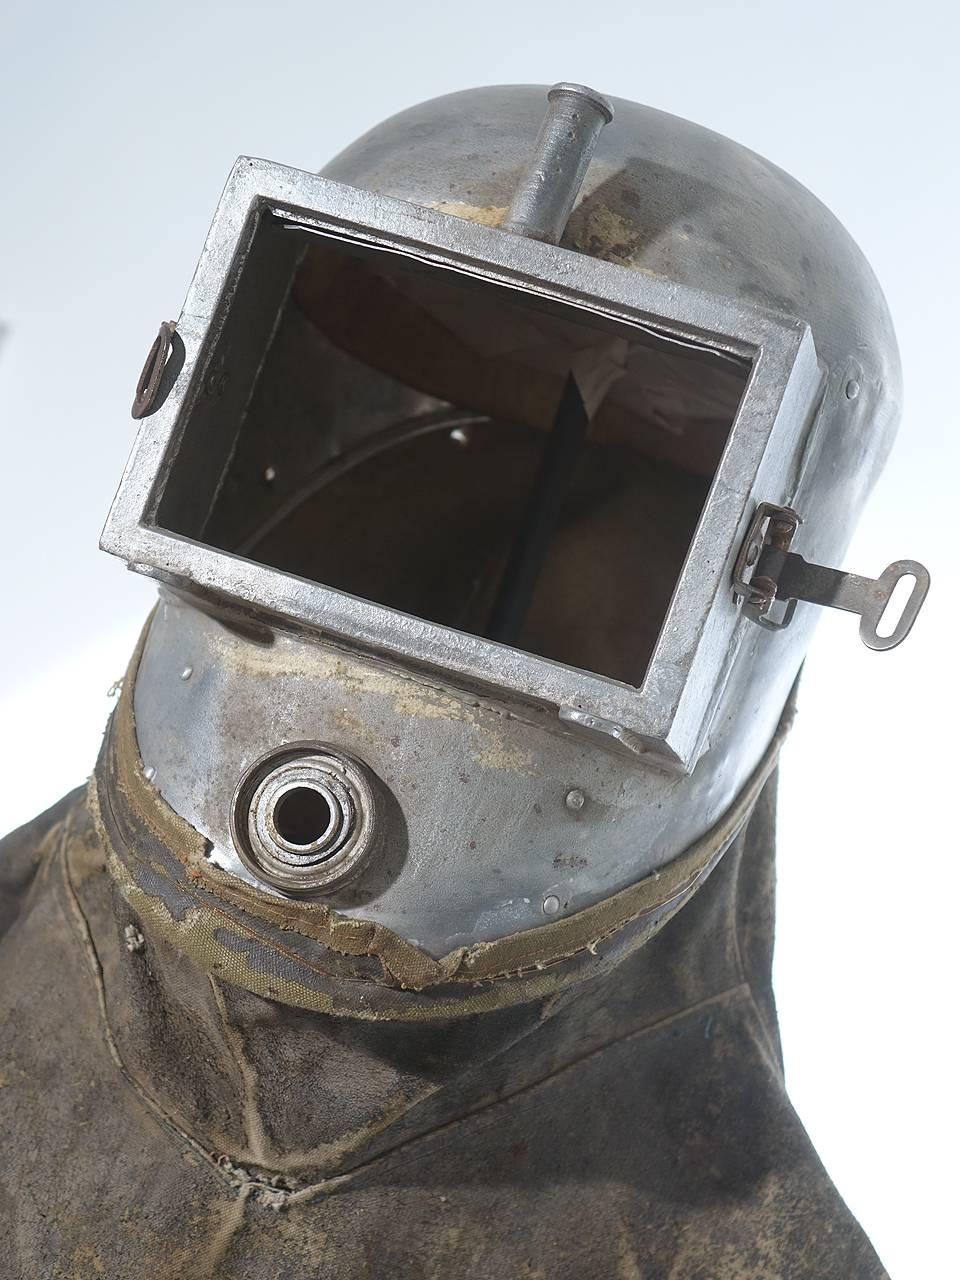 Unknown Early Sprayers Safety Suit on Custom Museum Stand